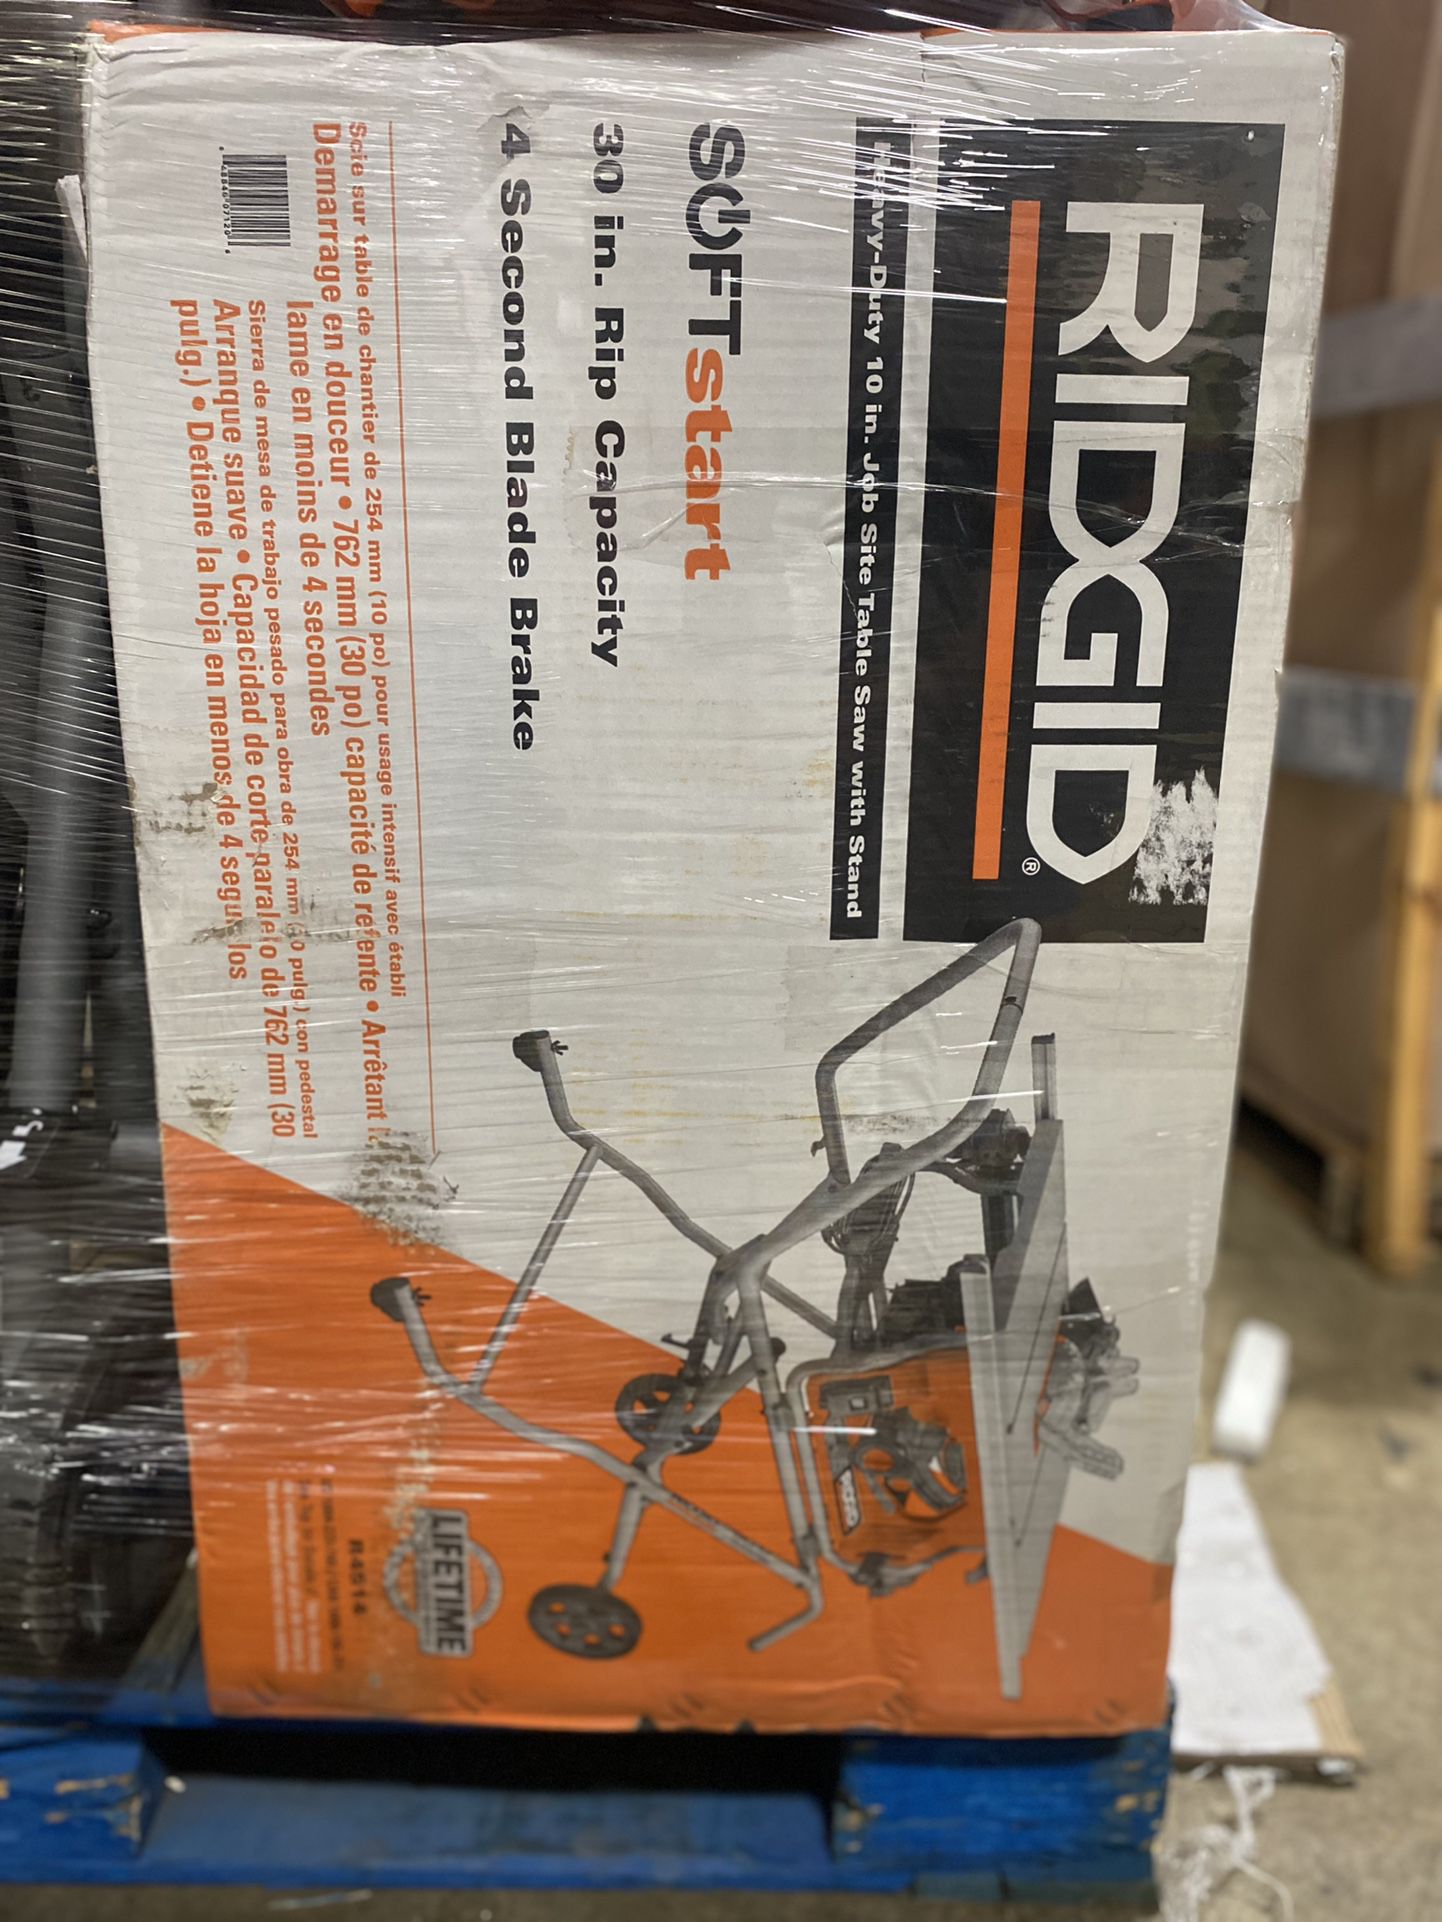 RIDGID 10 in. Pro Jobsite Table Saw with Stand